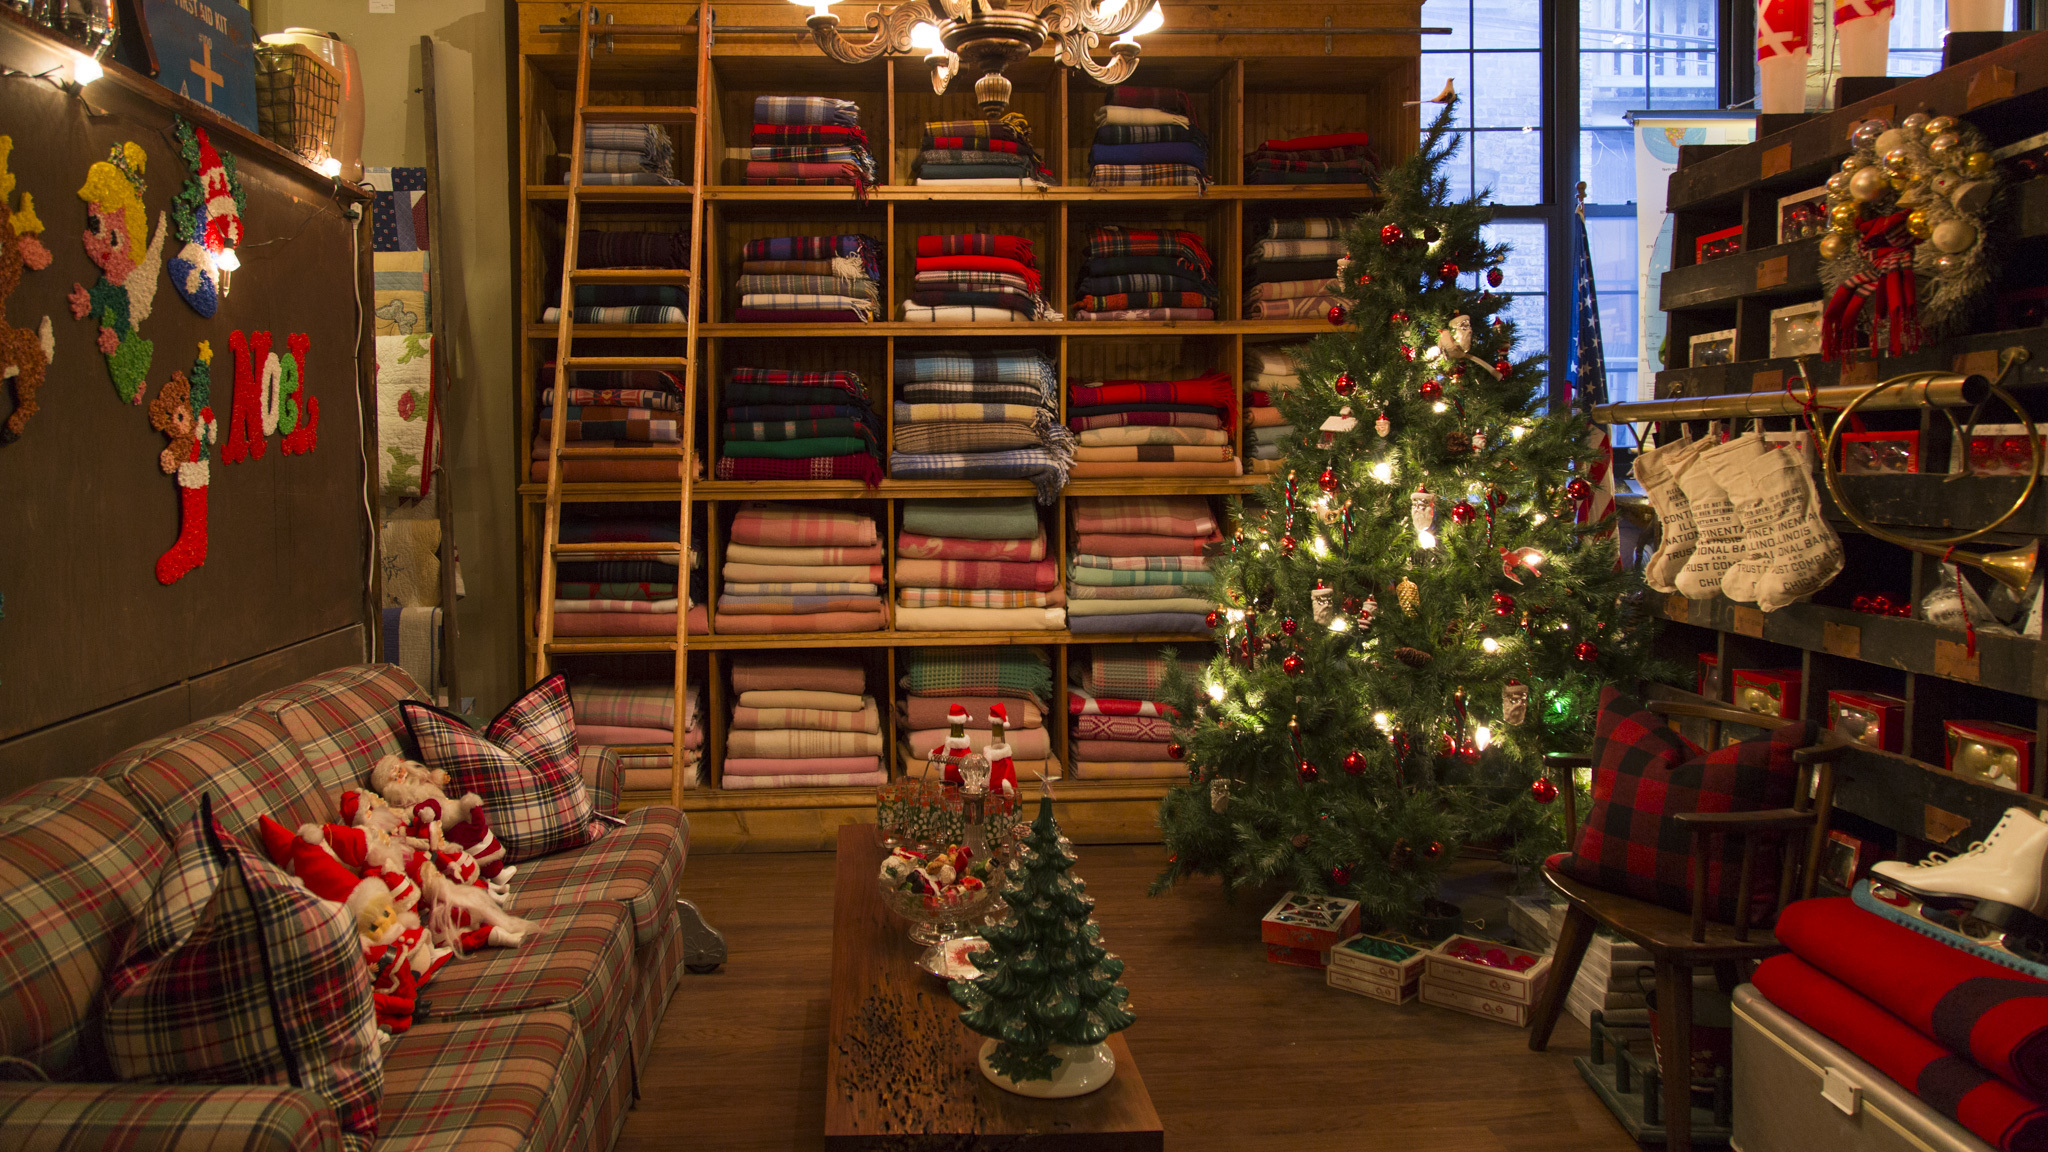 Get in the holiday spirit at these Chicago Christmas stores